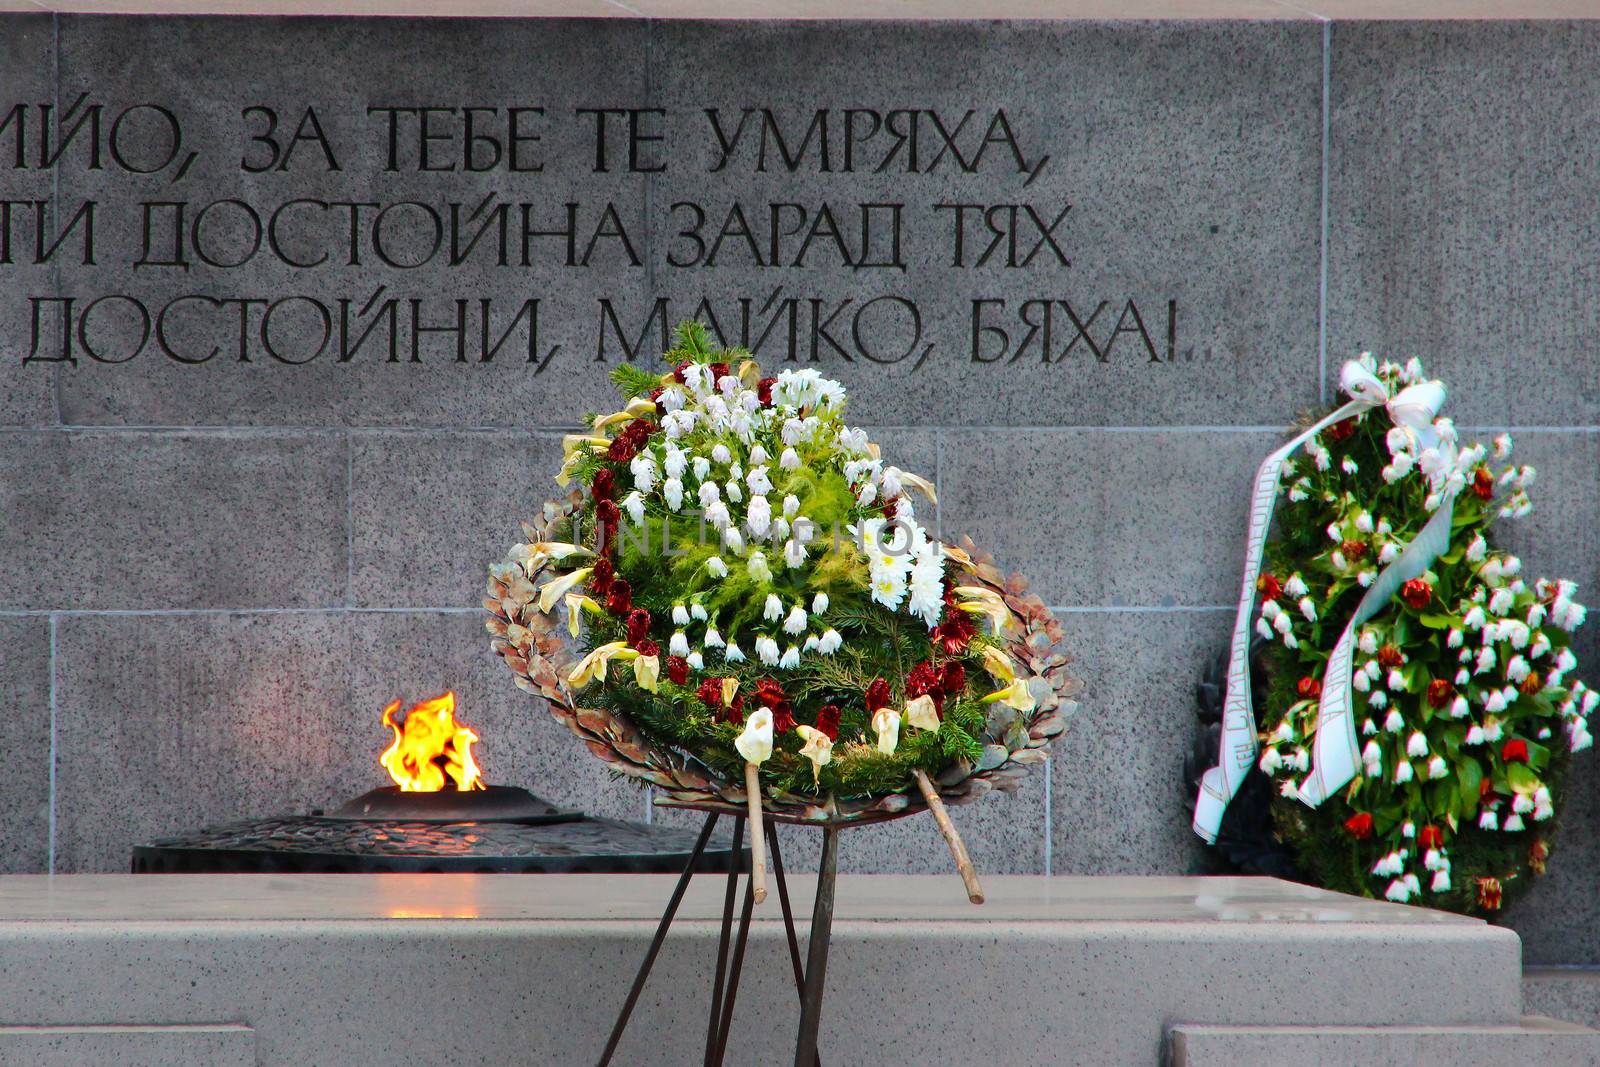 The monumant of the Unknown Soldier in Sofia, Bulgaria with an eternal flame